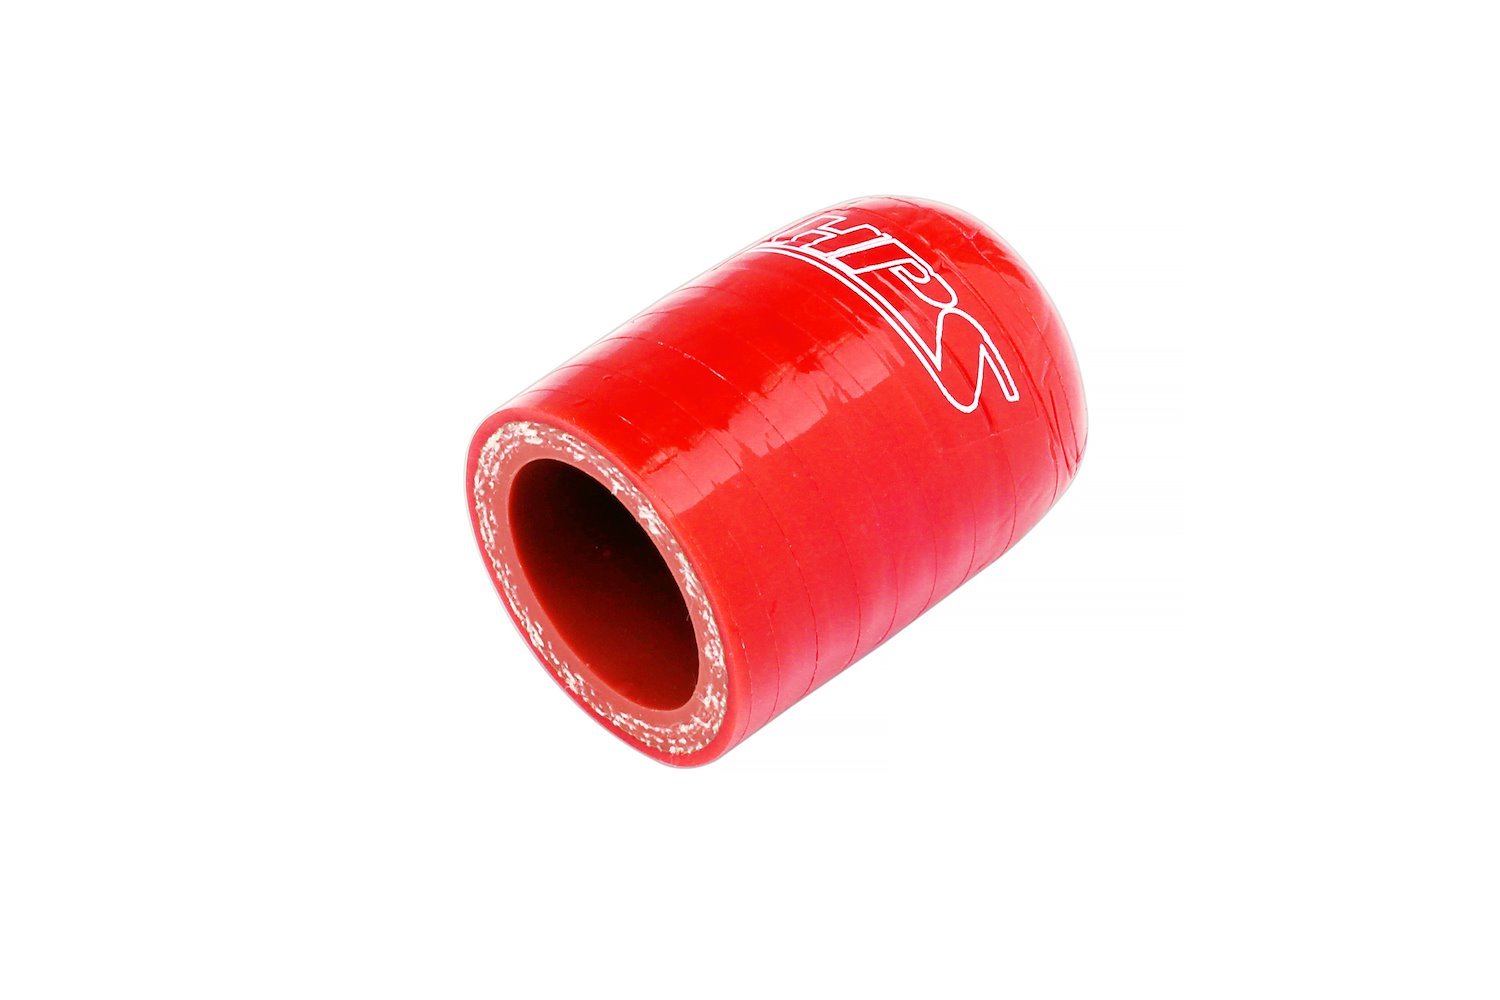 RSCC-100-RED Coolant Bypass Cap, 3-Ply Reinforced High-Temp. Silicone Bypass Cap, 1 in. ID, Red